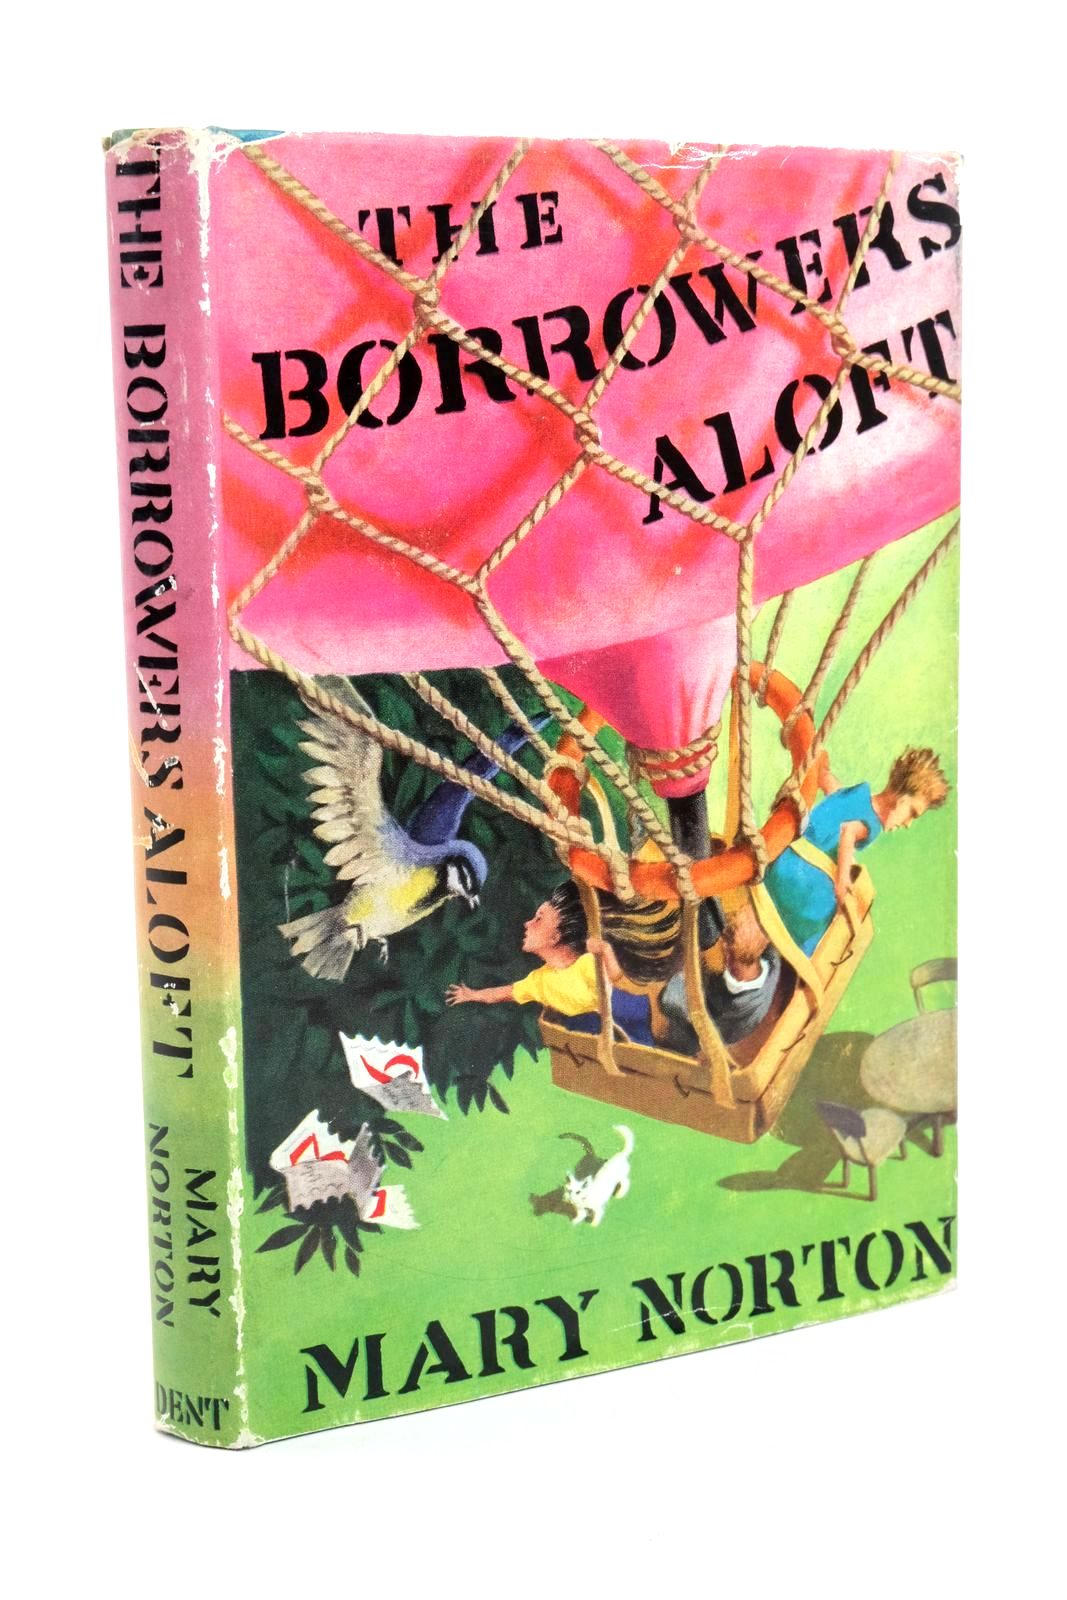 Photo of THE BORROWERS ALOFT written by Norton, Mary illustrated by Stanley, Diana published by J.M. Dent & Sons Ltd. (STOCK CODE: 1322282)  for sale by Stella & Rose's Books